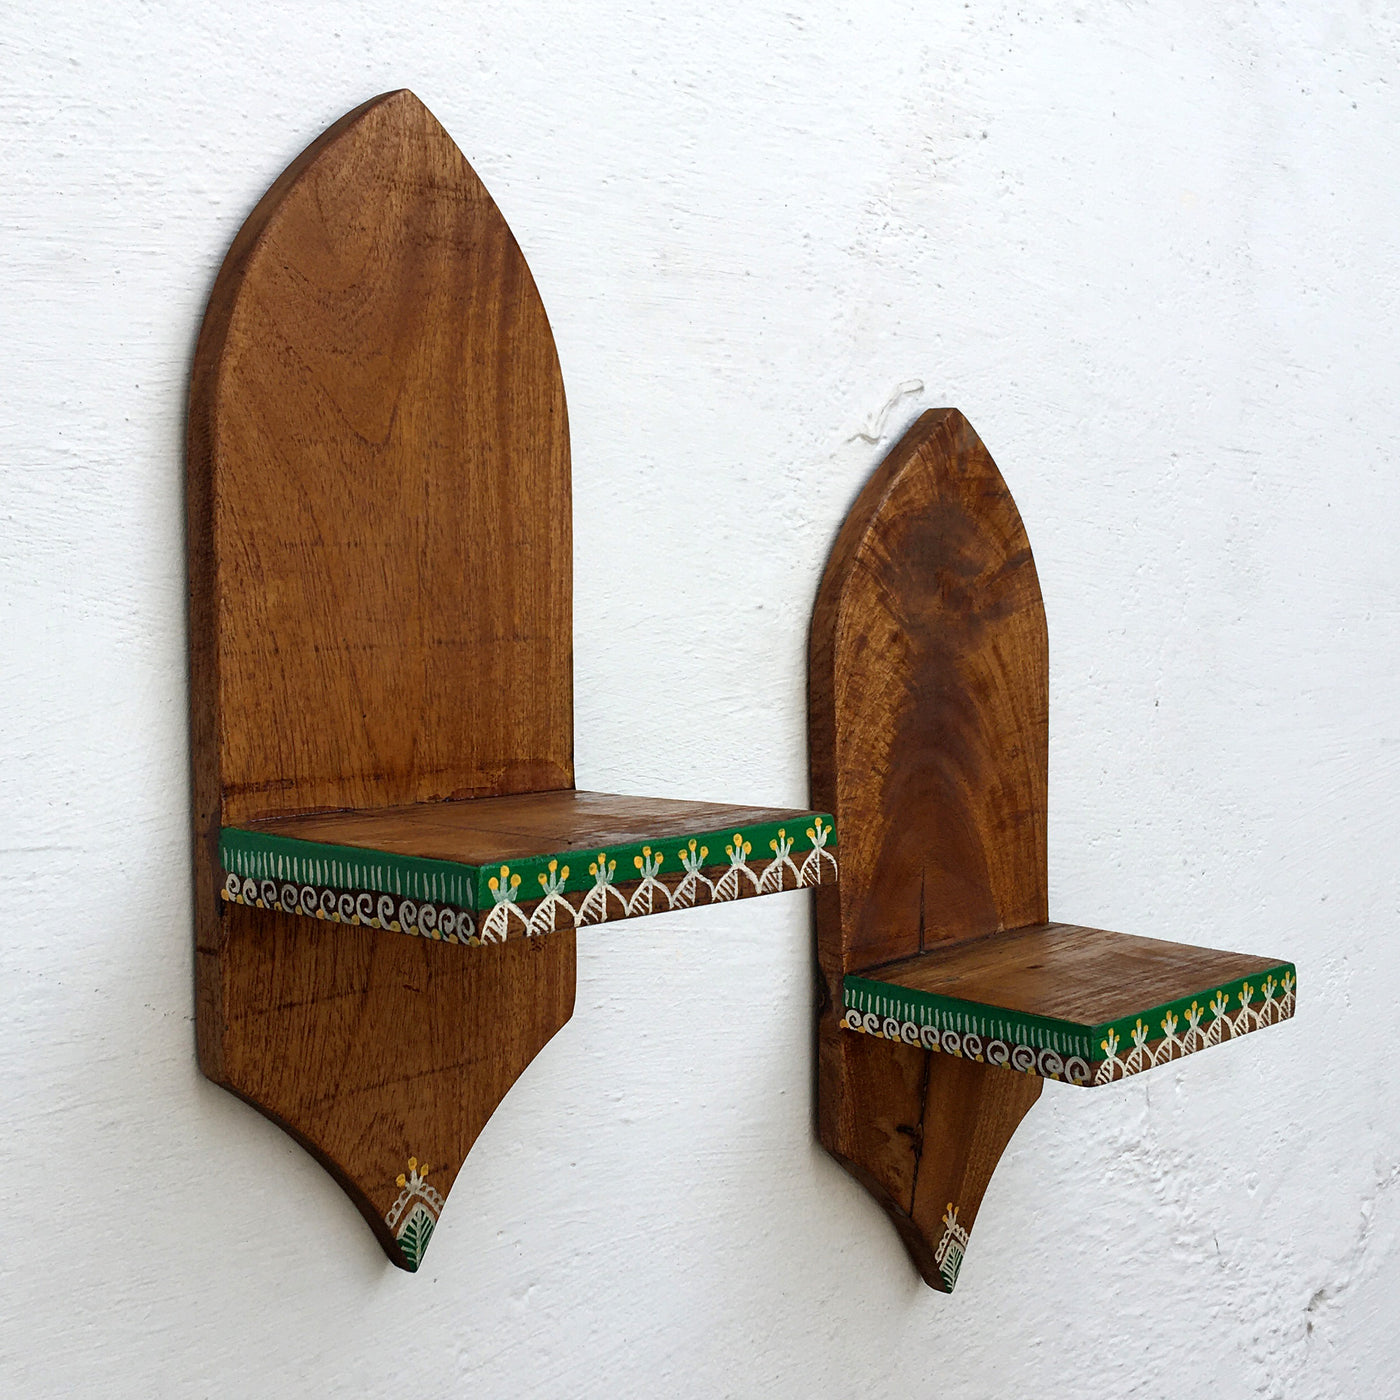 Wooden small wall rack